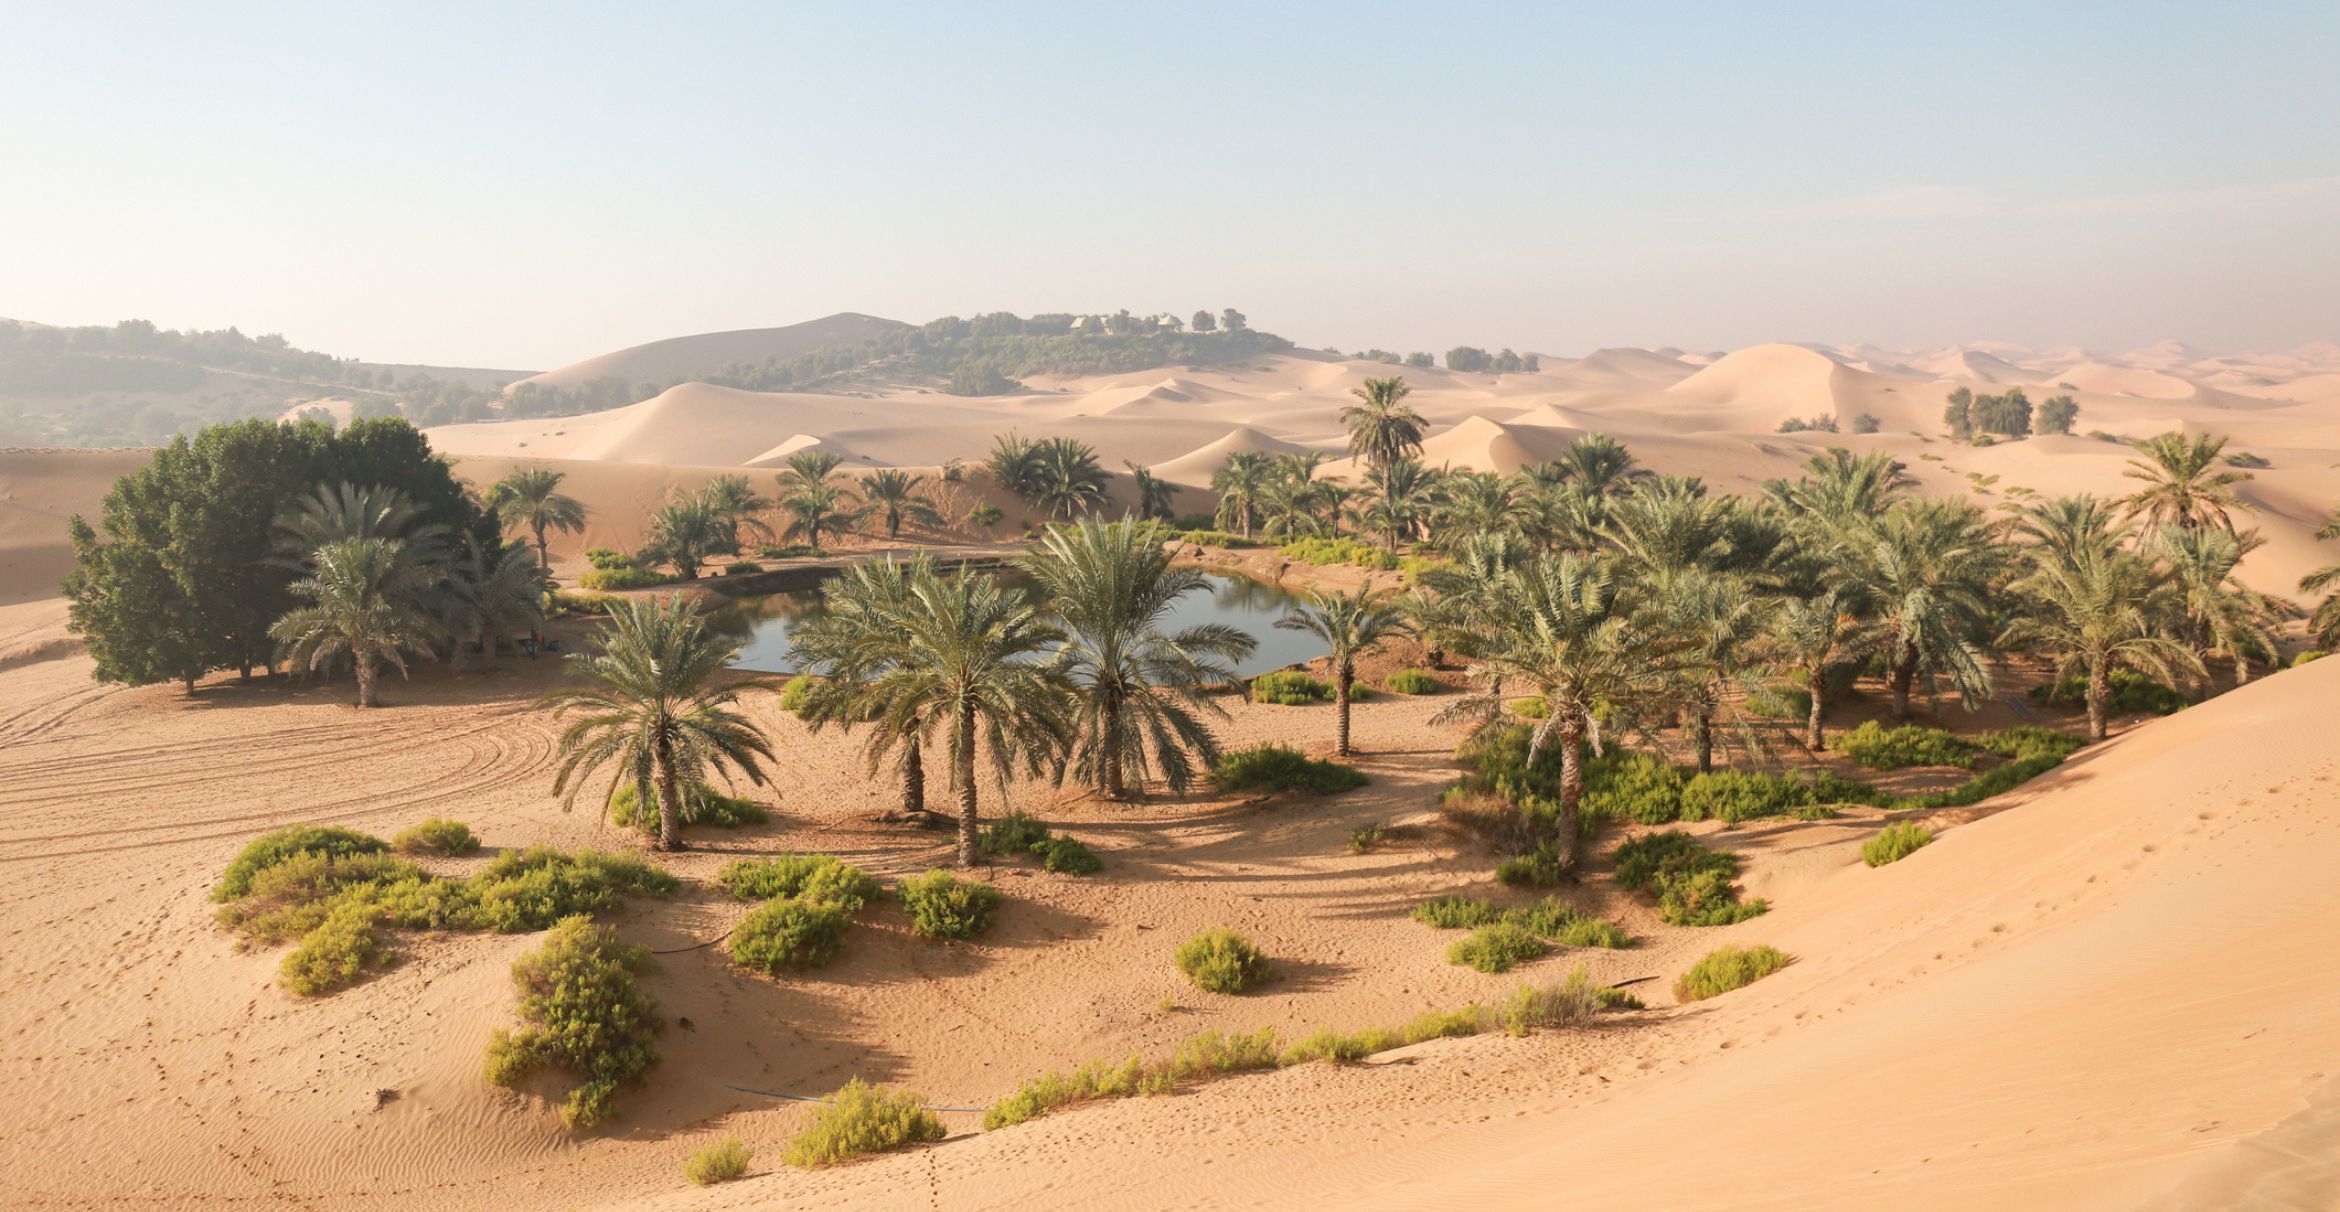 Sand dunes surround palms, trees, shrubs and a small lake in the UAE.